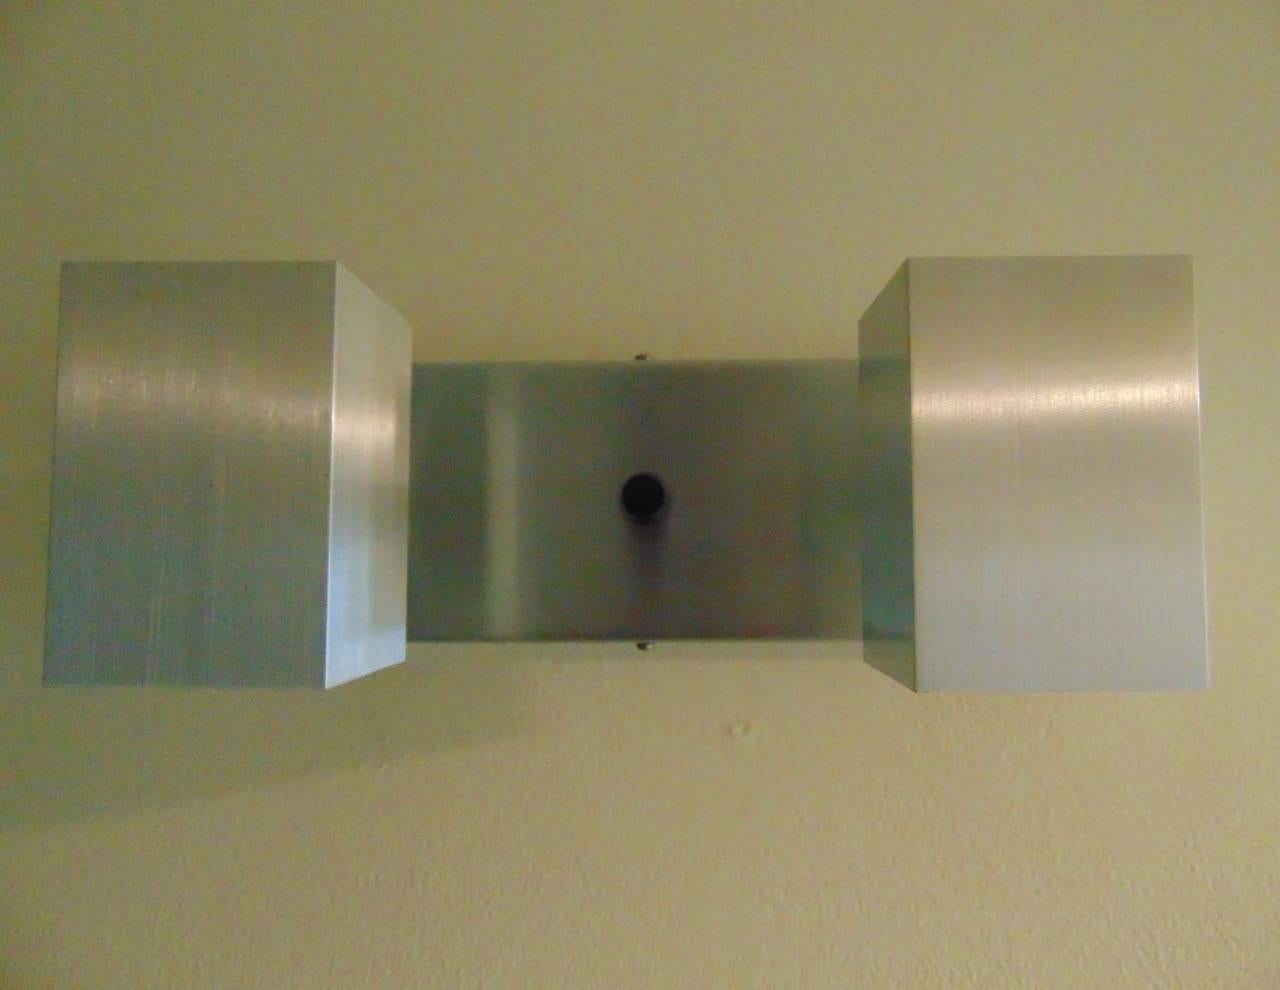 A vintage Mid-Century wall light designed by David Hurst in the 1960s-1970s and manufactured in England.
The light is wall-mounted with a double bulb feature which projects light downwards with a central switch.
This light is silver, we are also